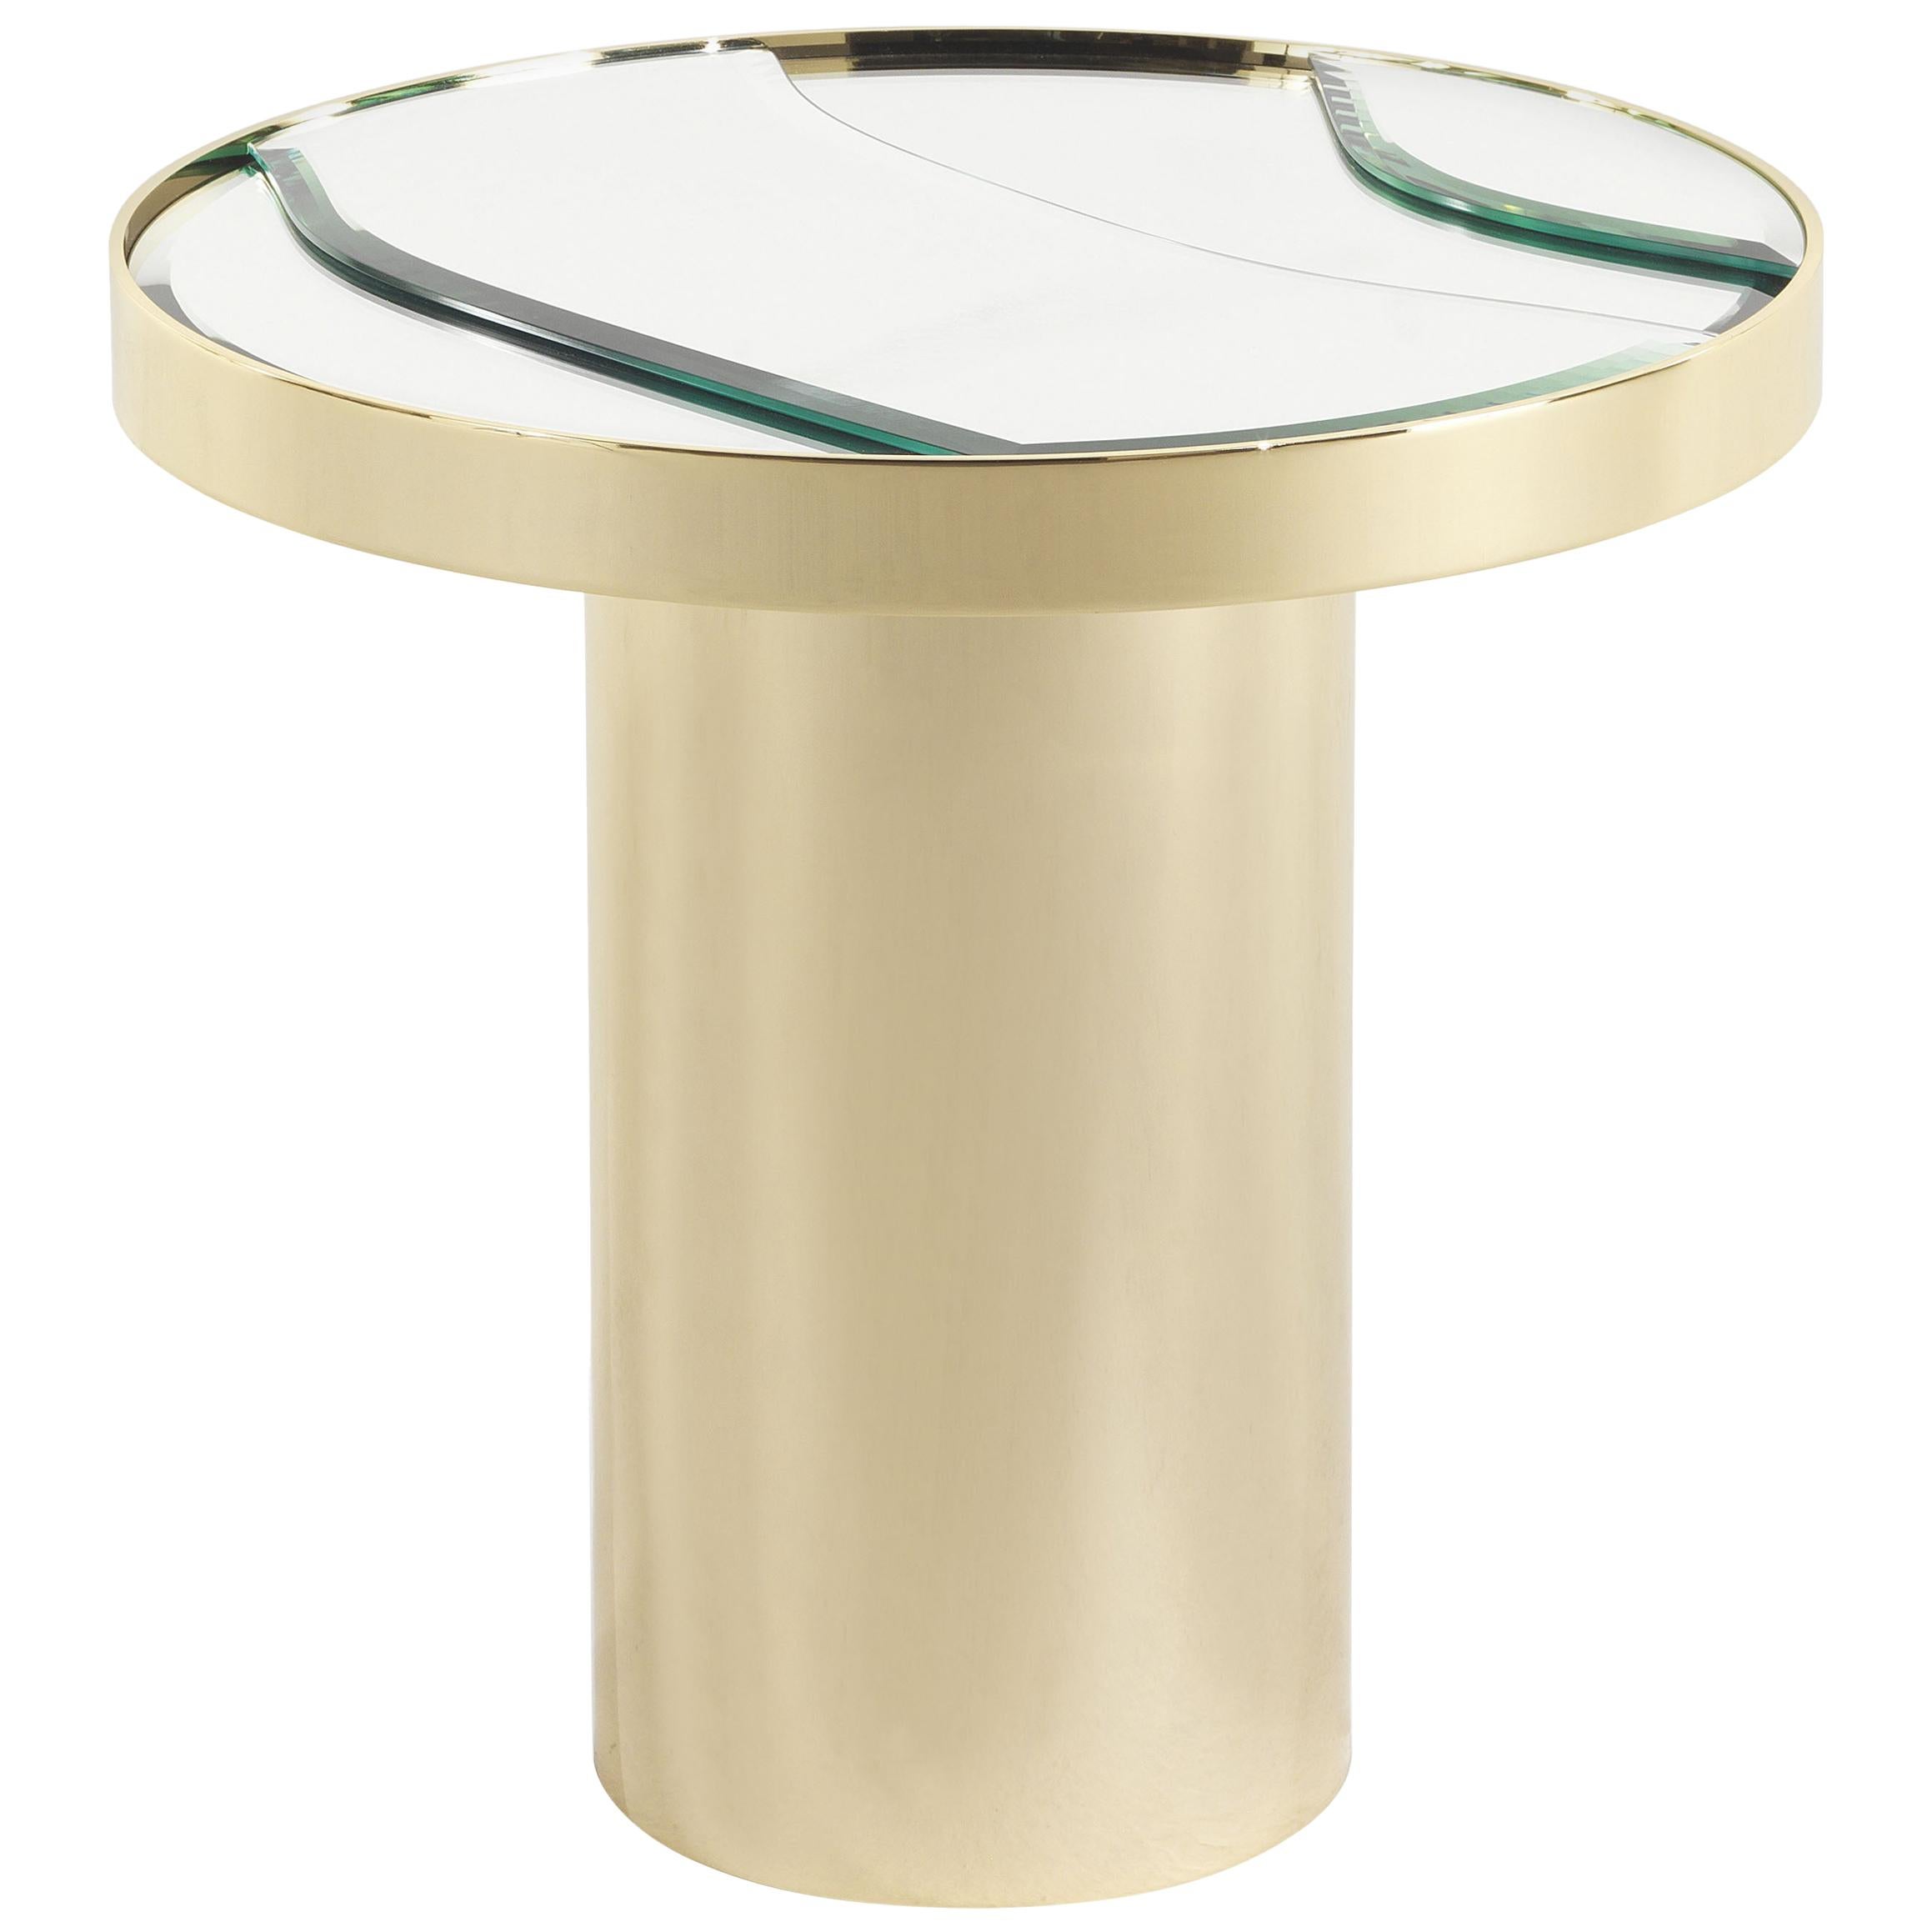 21st Century Sahara Side Table with Mirror Top by Roberto Cavalli Home Interiors